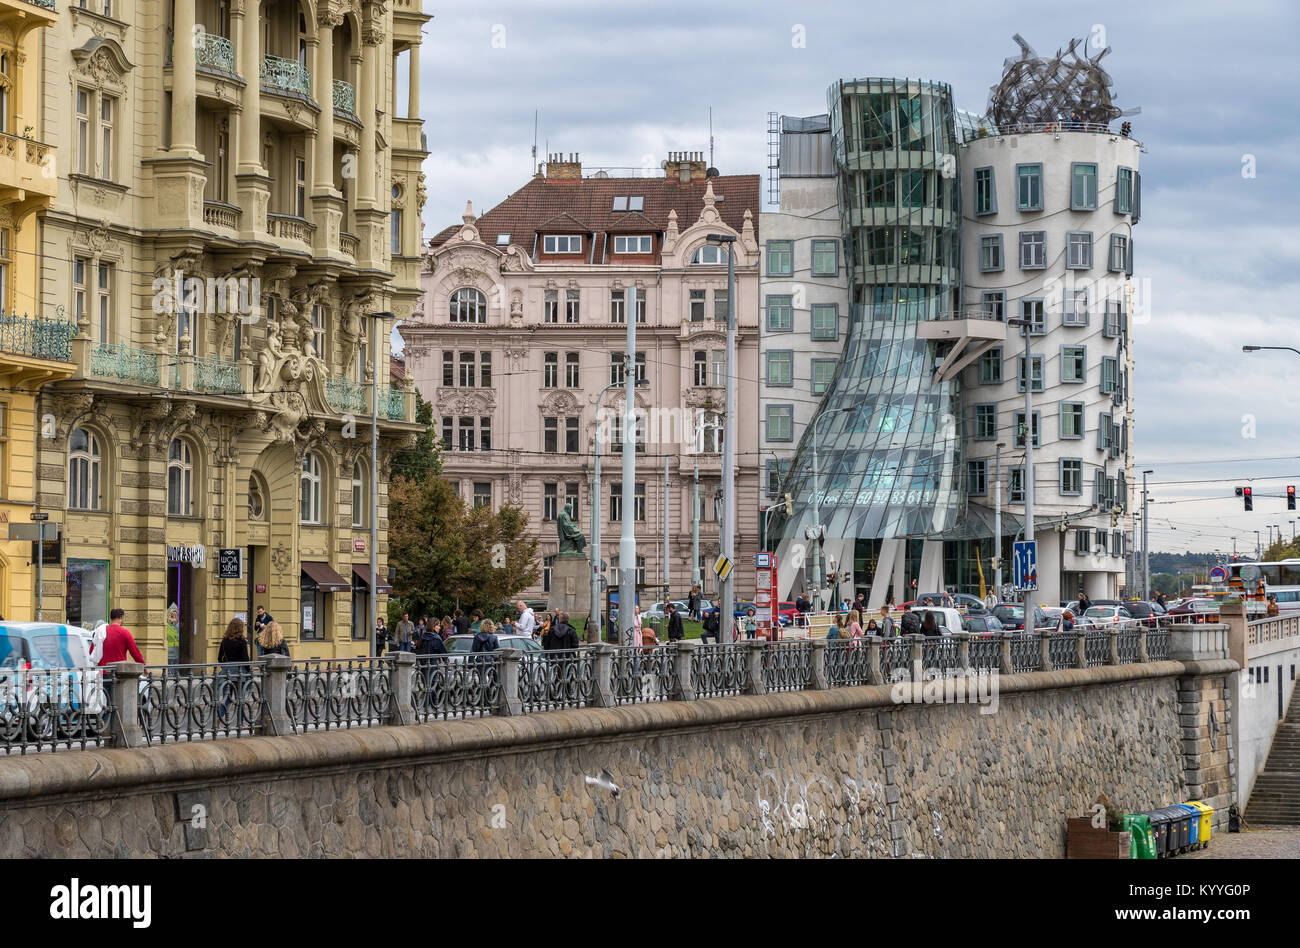 The Dancing house Hotel , The Dancing House a significant landmark building in Prague with a highly original design Stock Photo